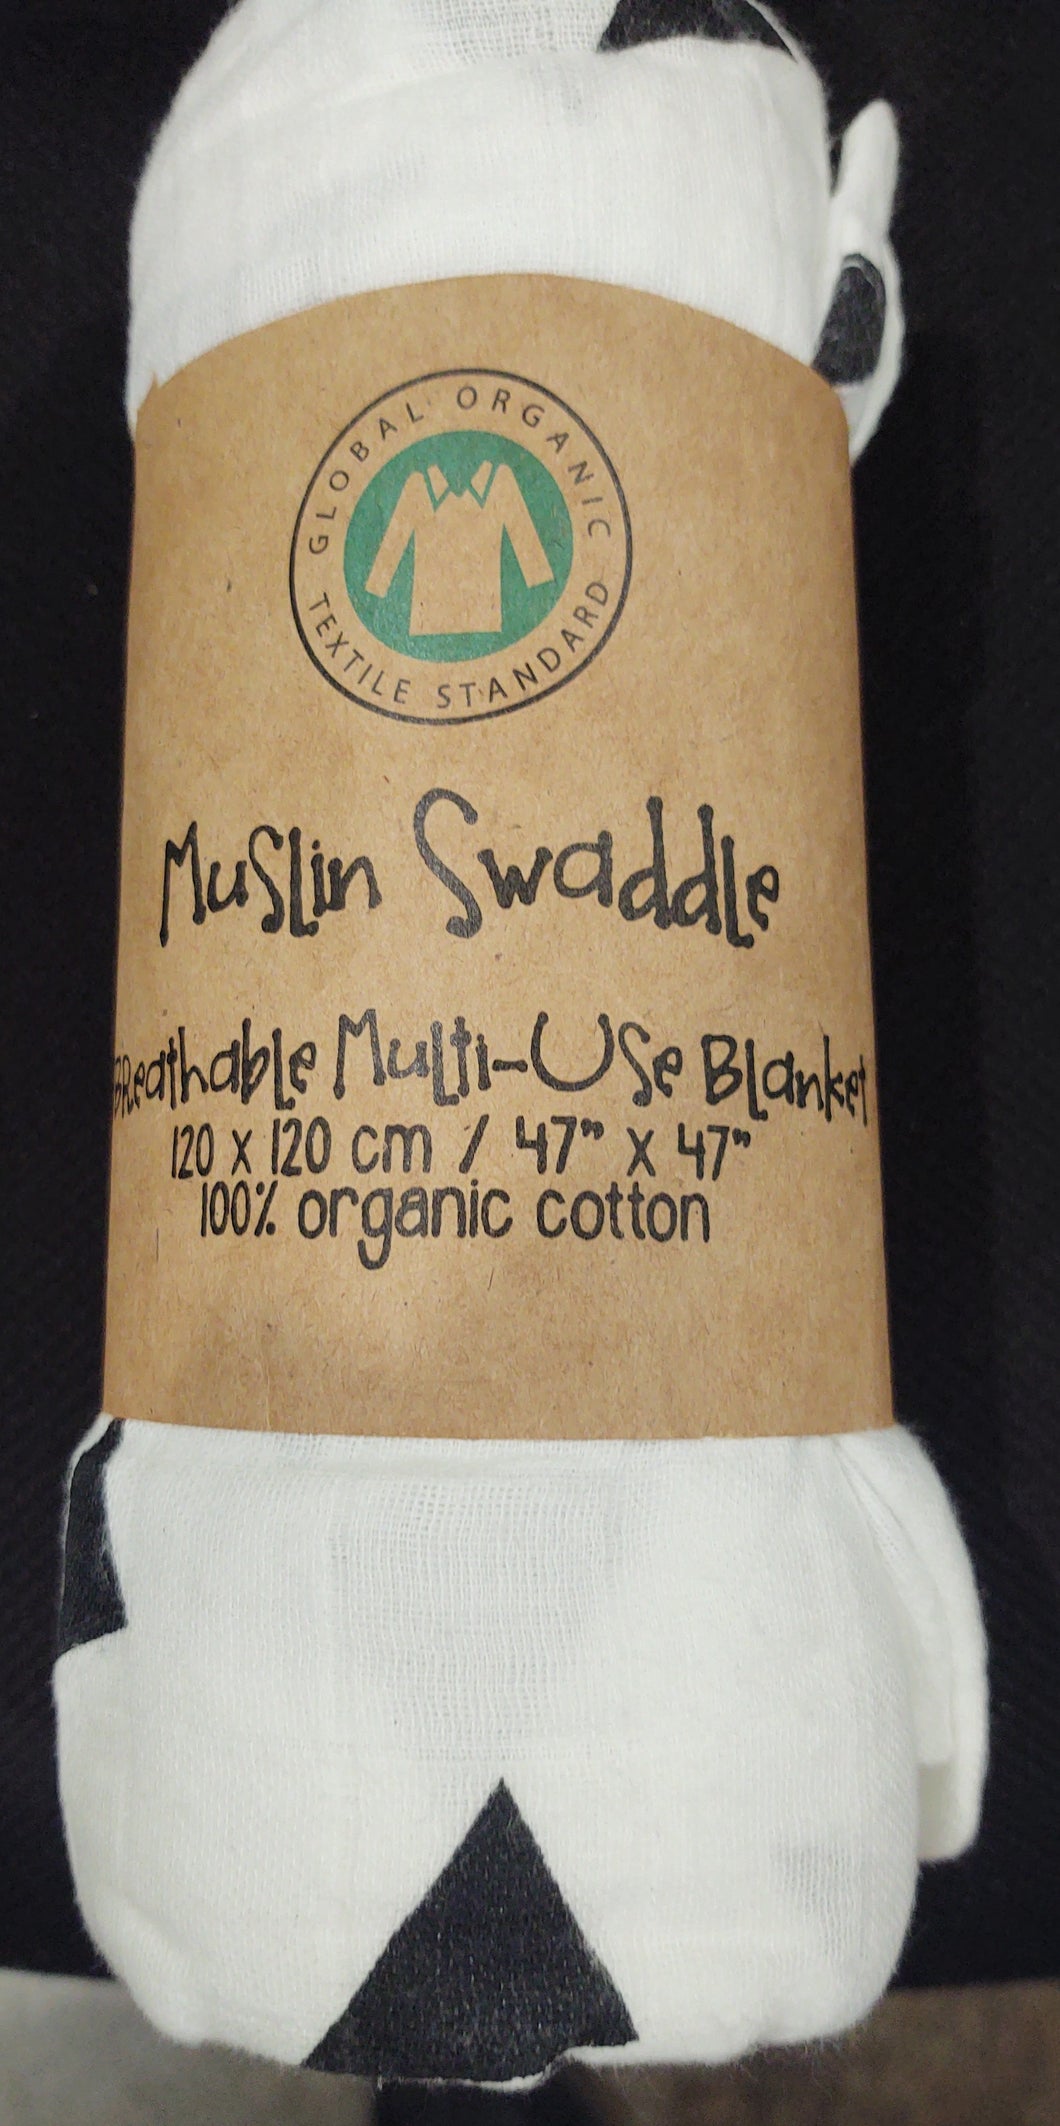 Swaddle Blanket Triangle Muslin  - Multi Use Blanket By Global Organic Textile